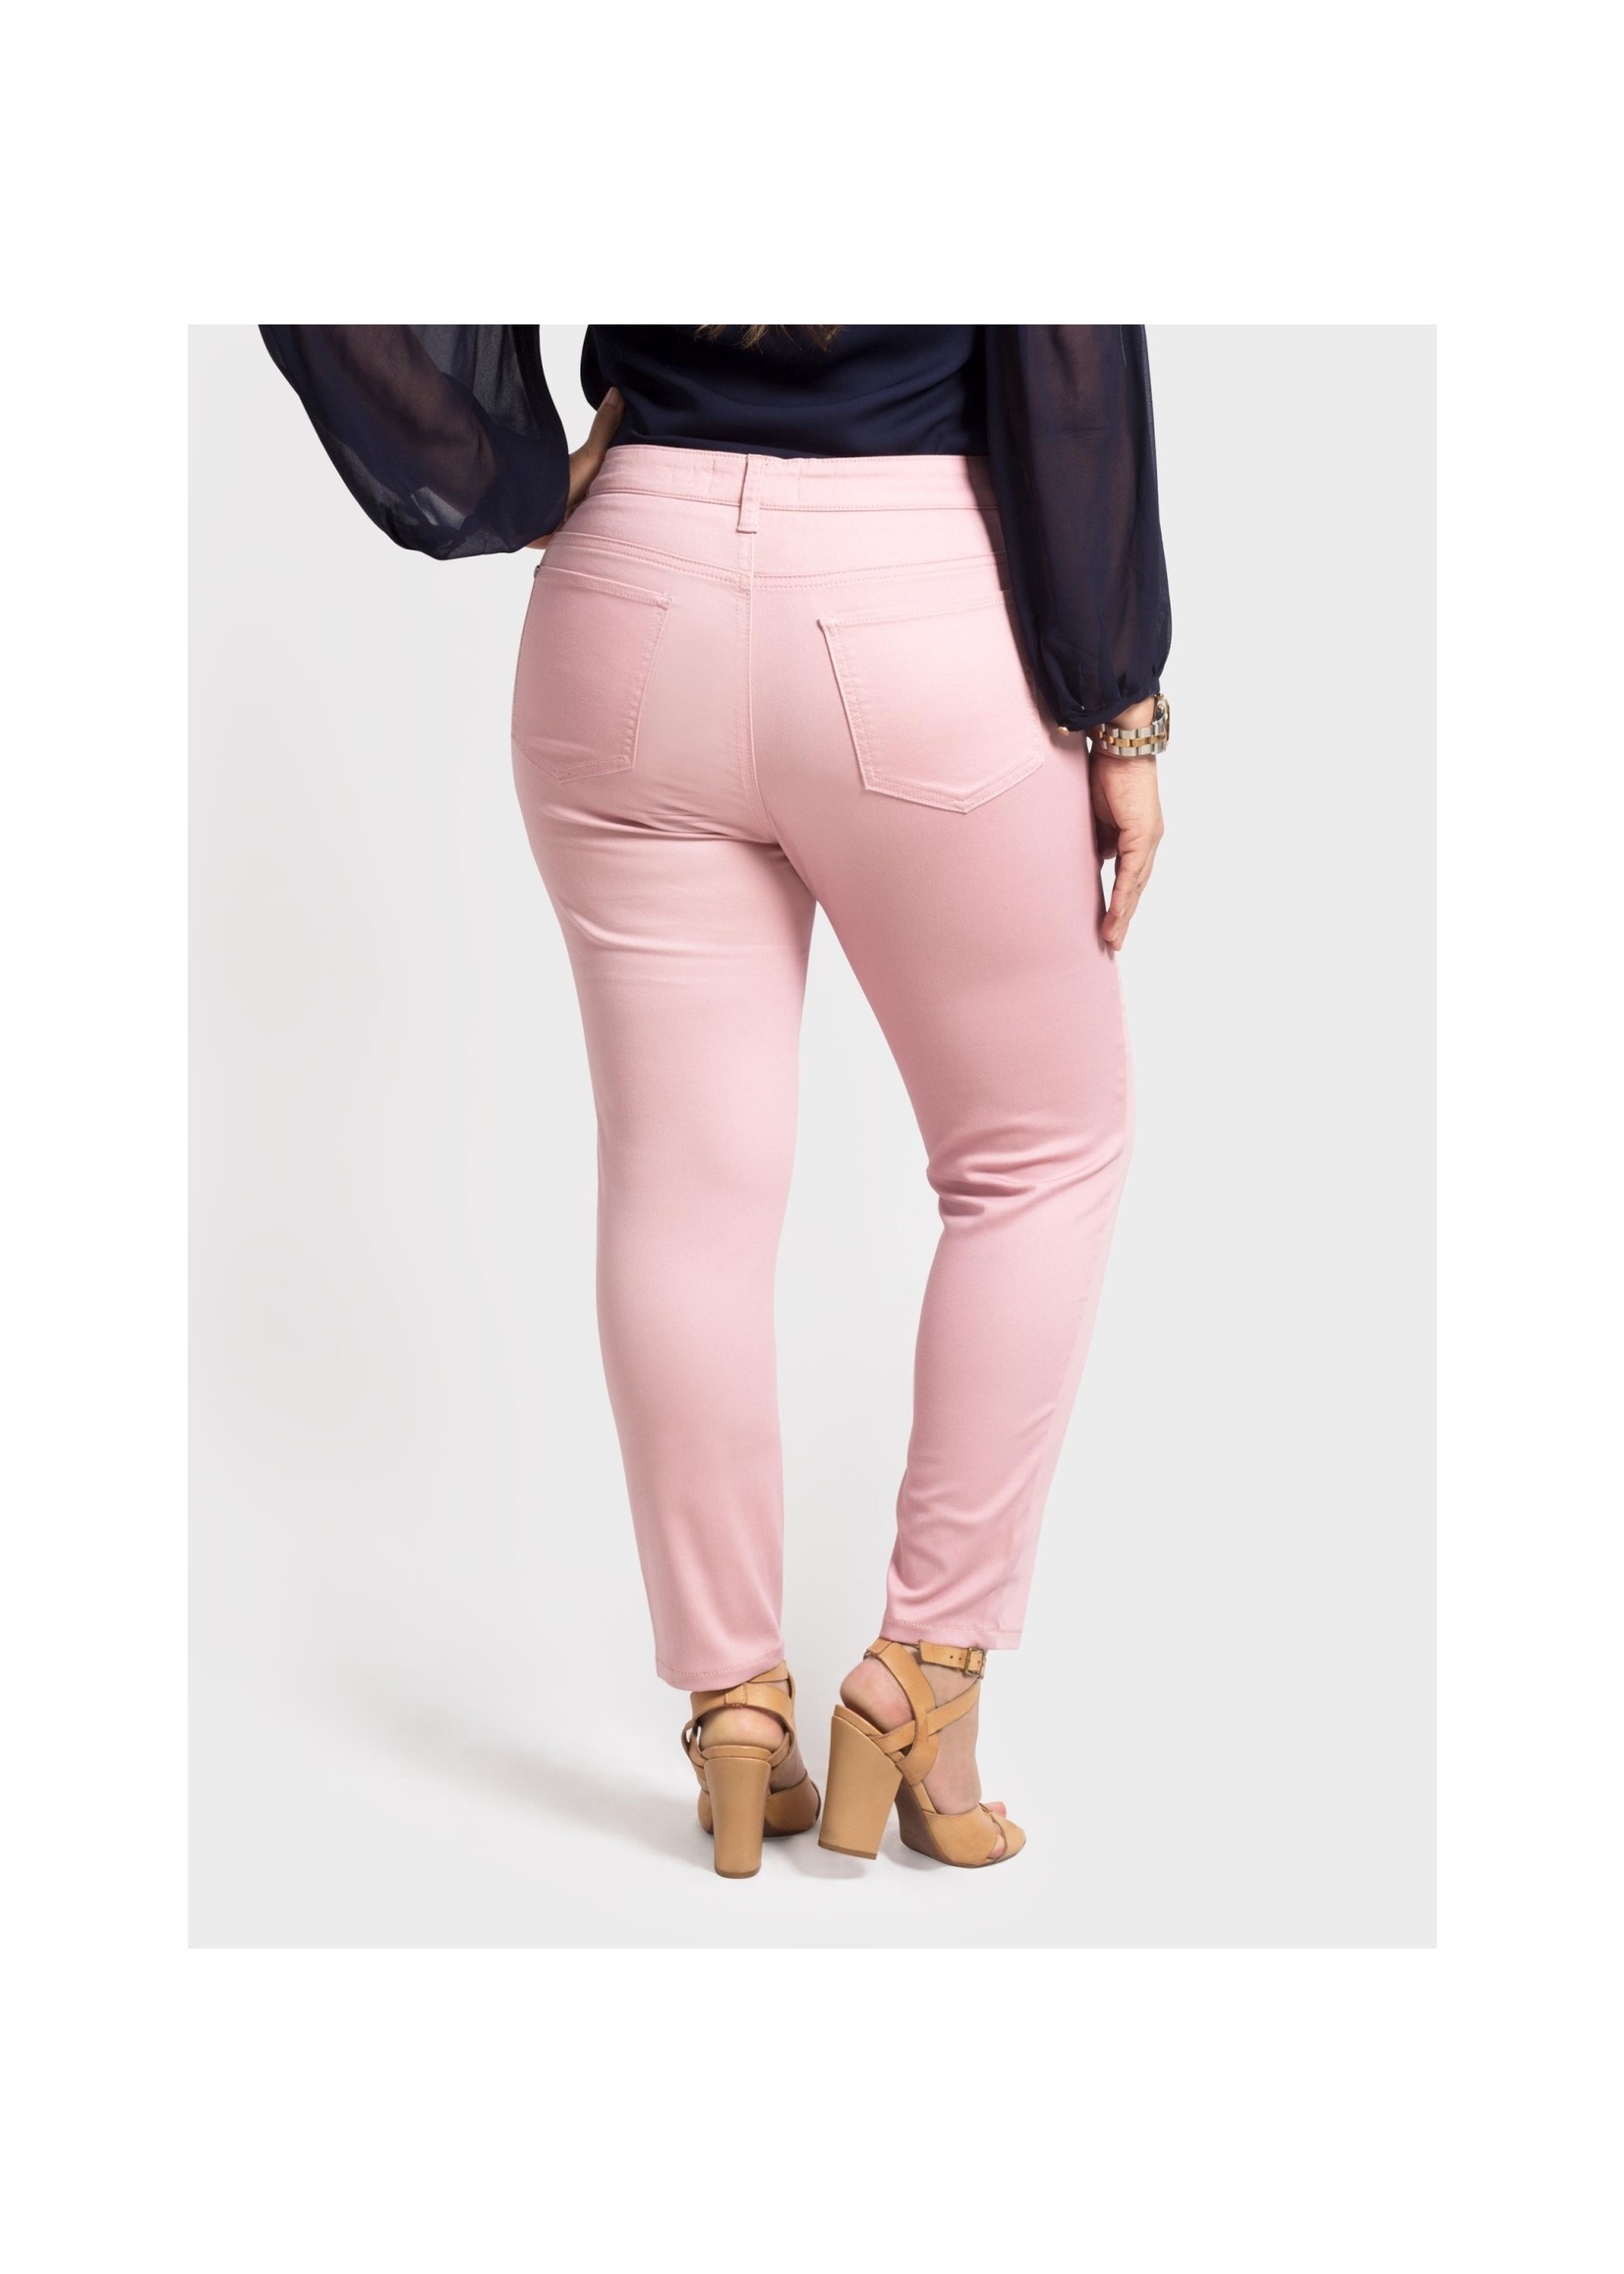 OLGYN Stretch Pink Plus Size Ankle Pant Slim Fit